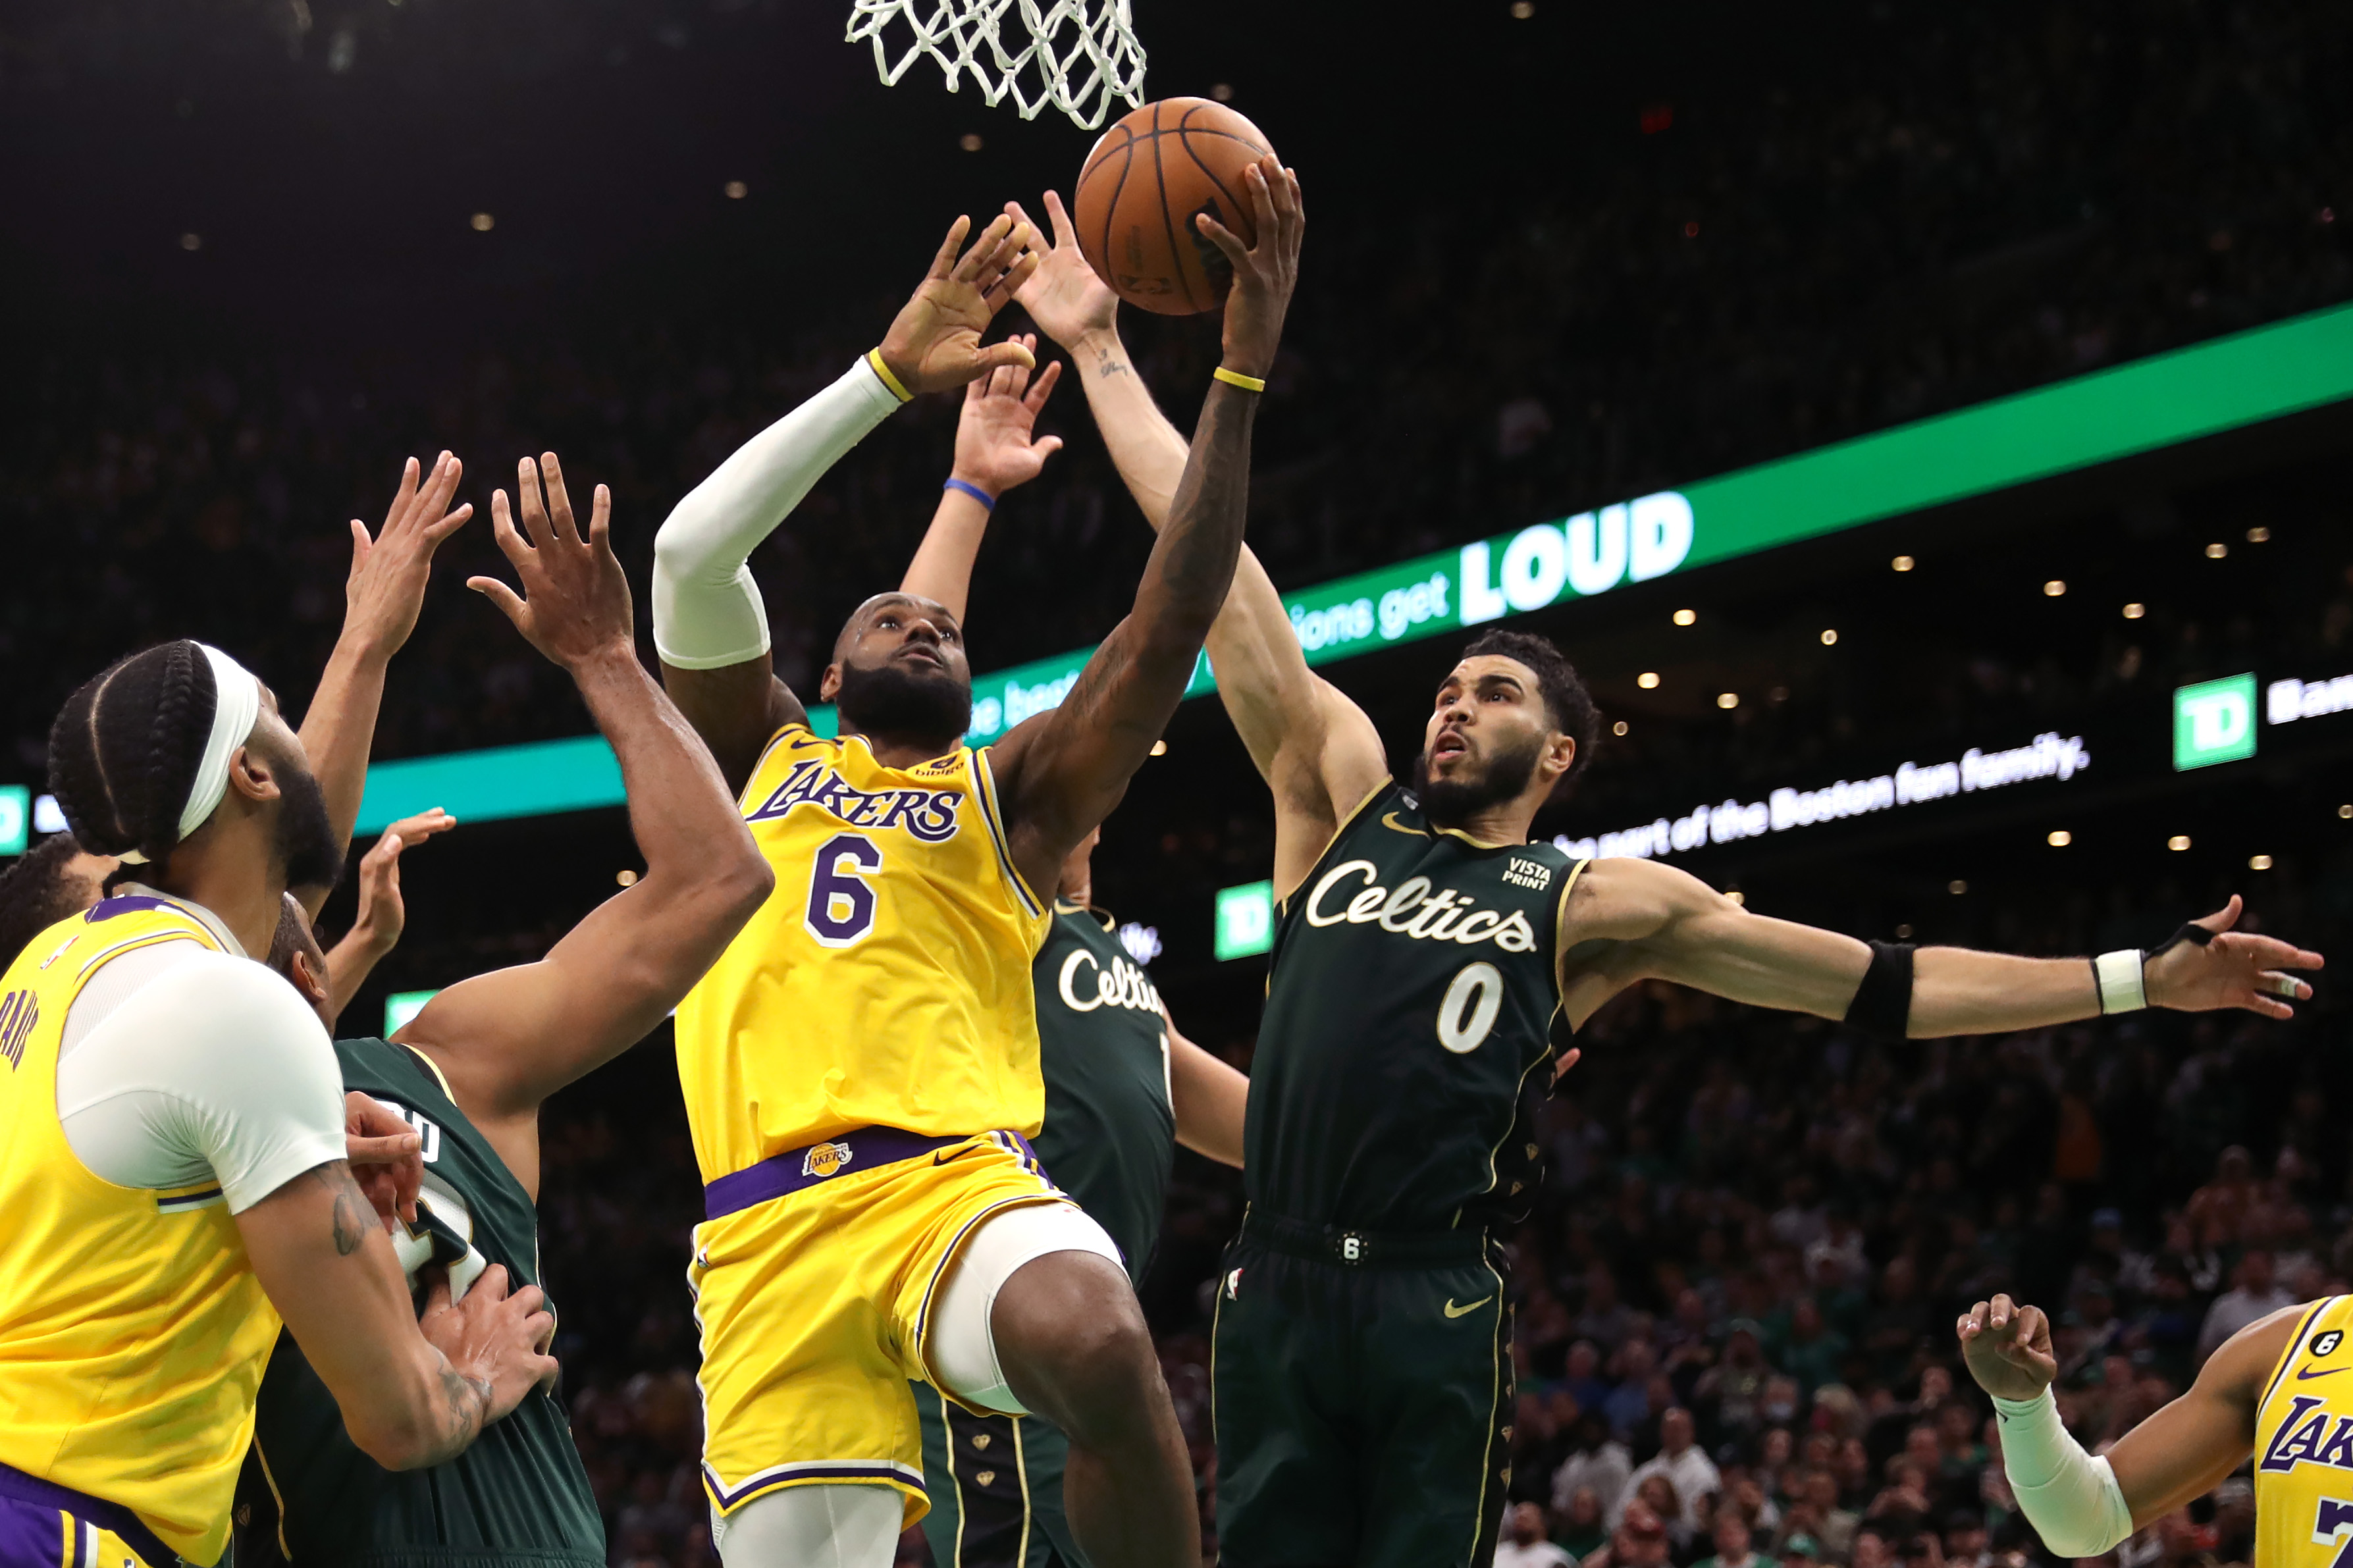 A foul that wasn't called, Patrick Beverley's funny stunt, and Jaylen Brown  in the clutch: Unpacking Celtics-Lakers - The Boston Globe